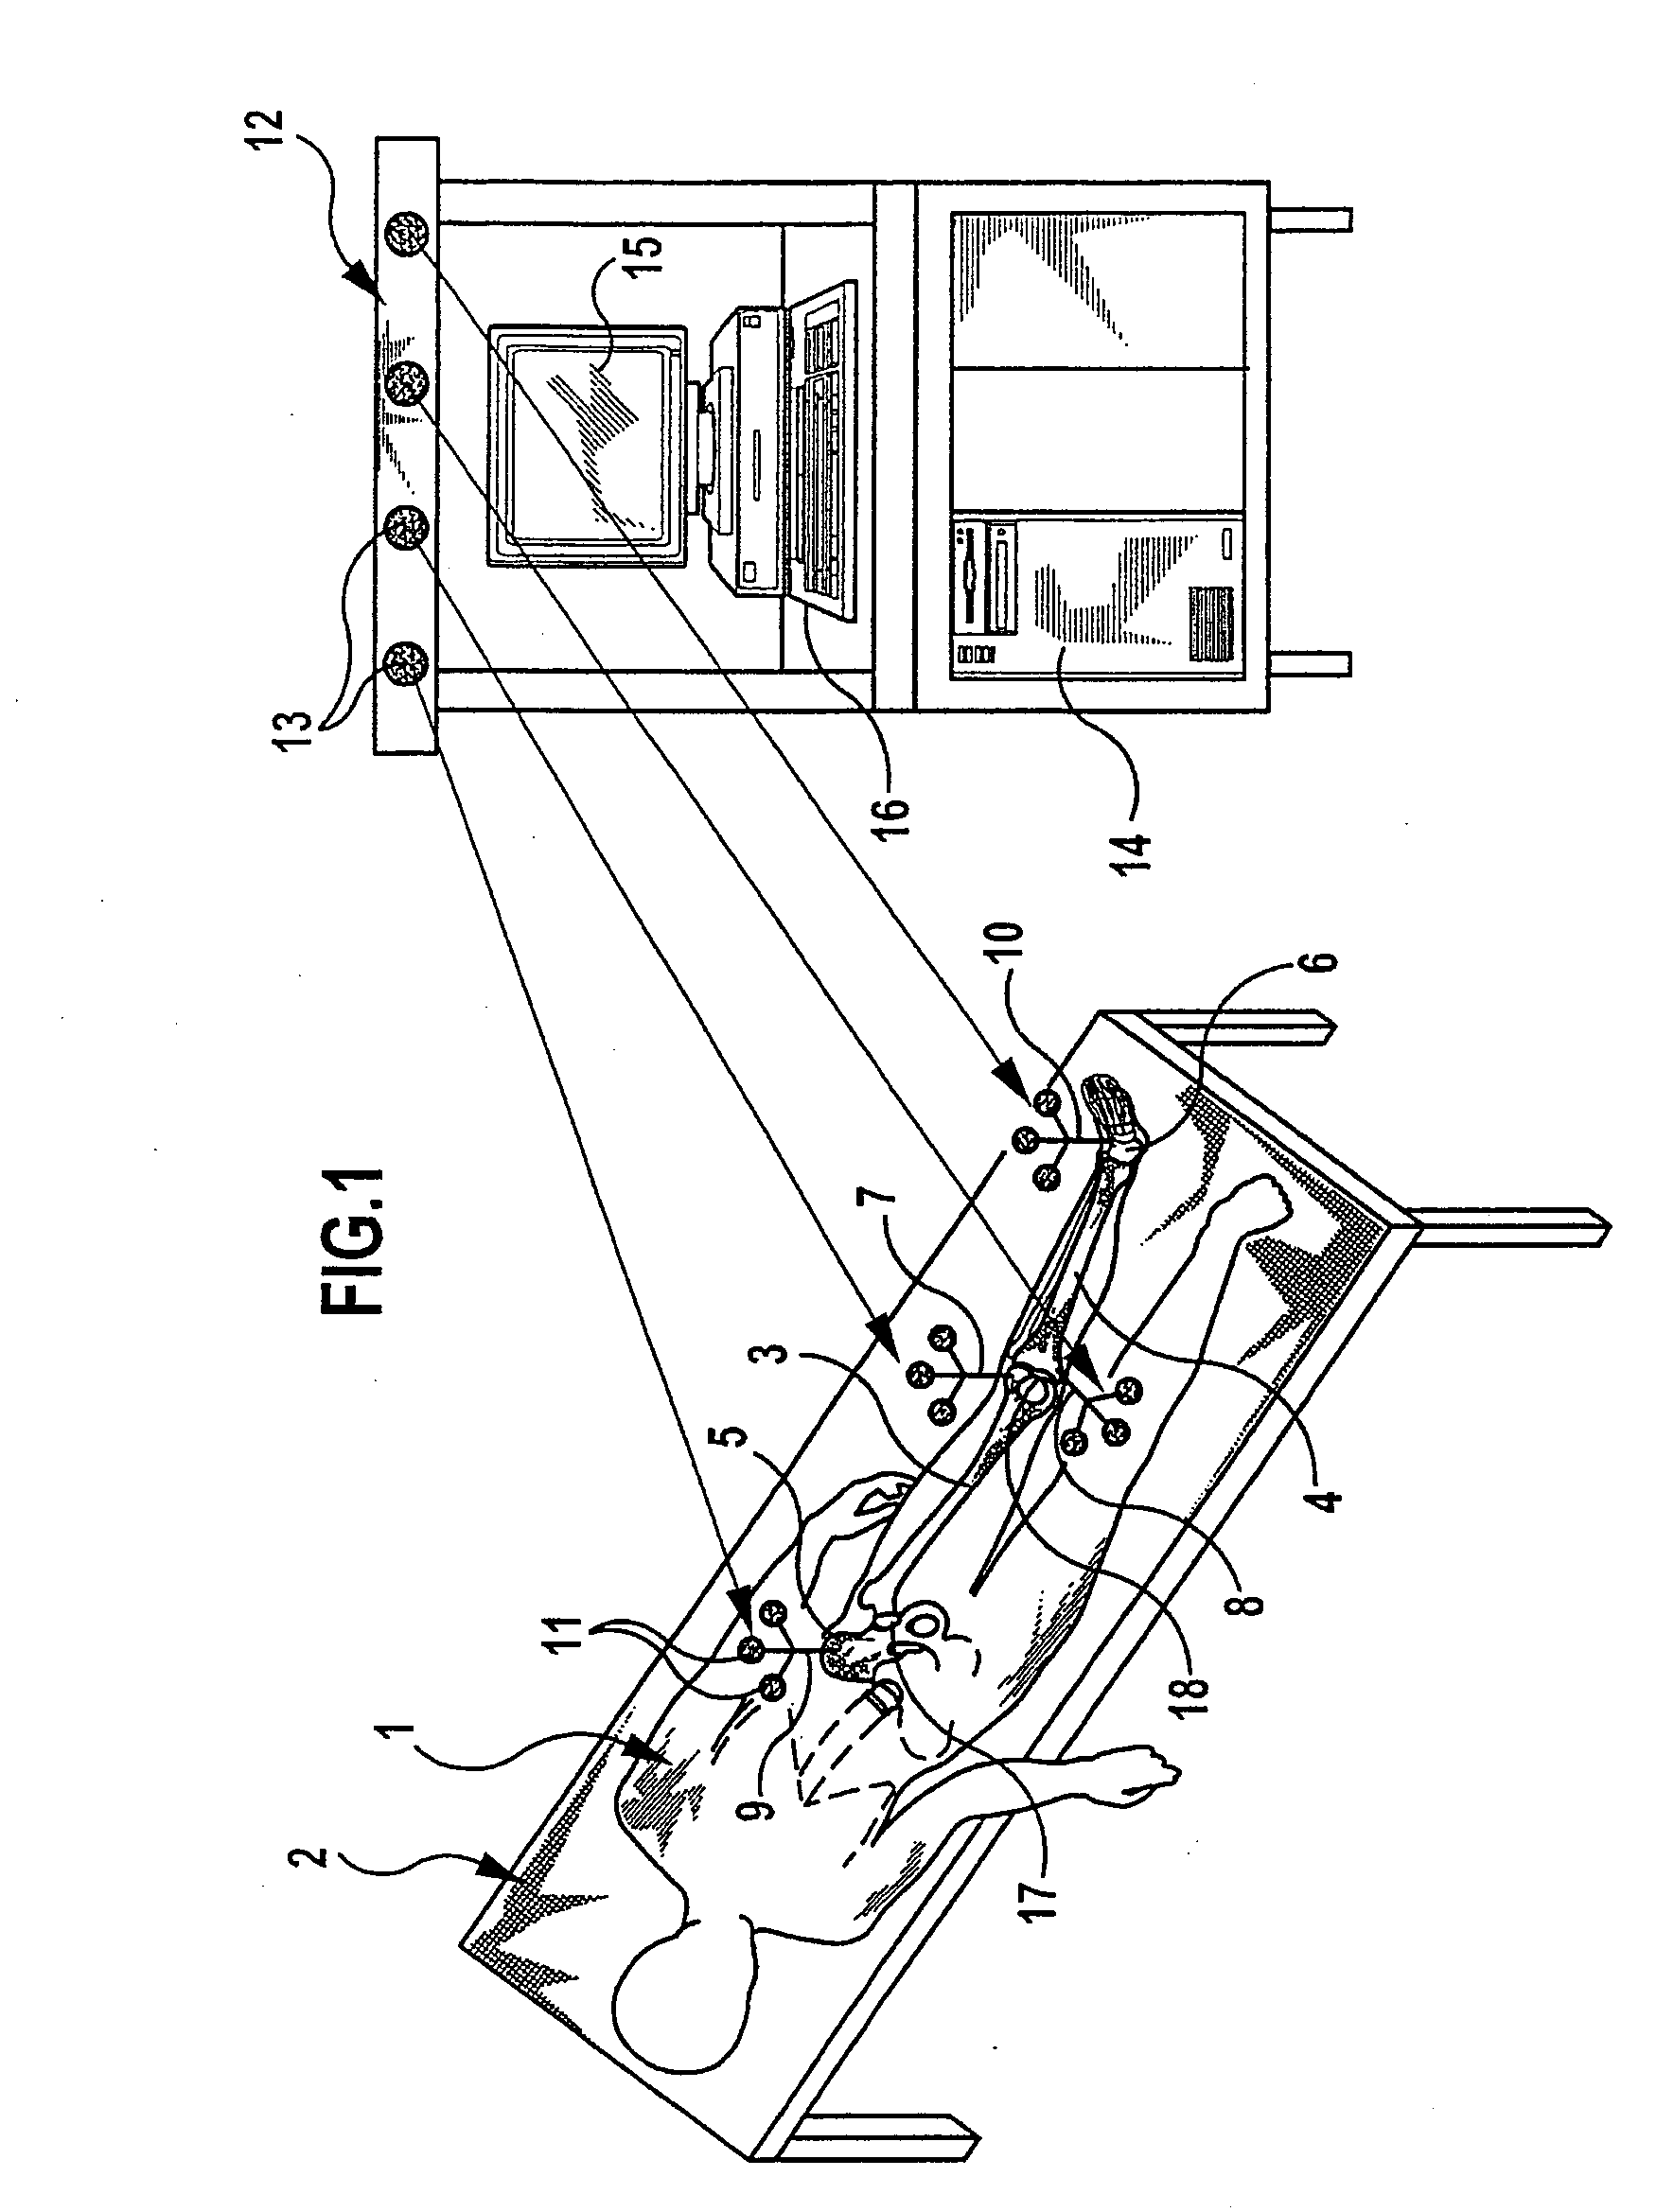 Method and device for determining the position of a knee-joint endoprosthesis